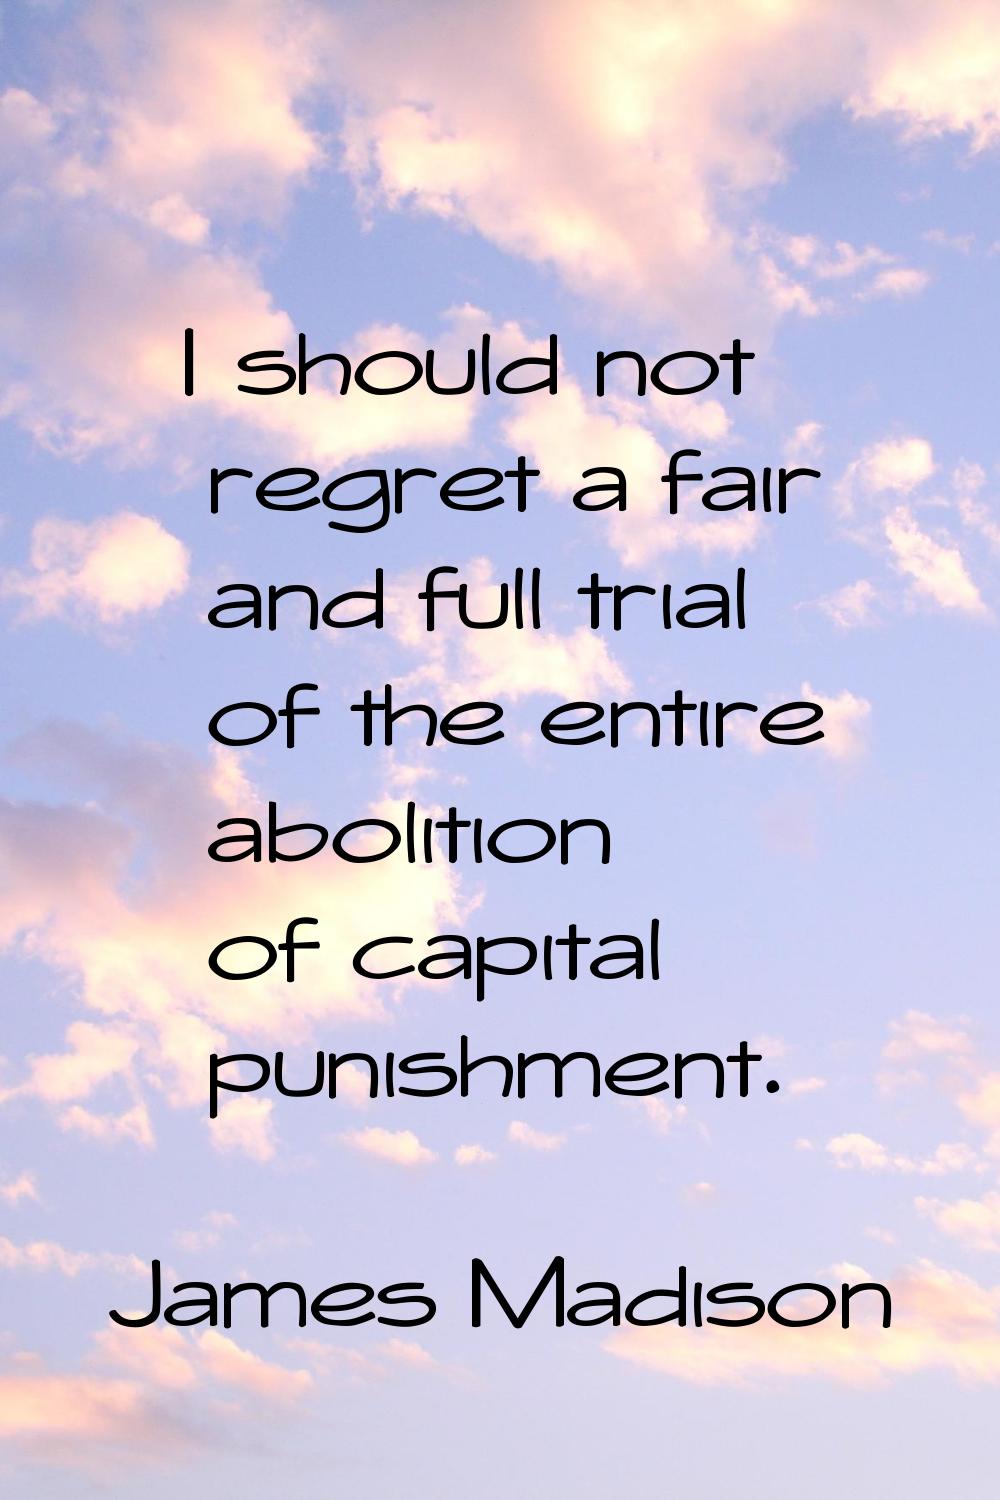 I should not regret a fair and full trial of the entire abolition of capital punishment.